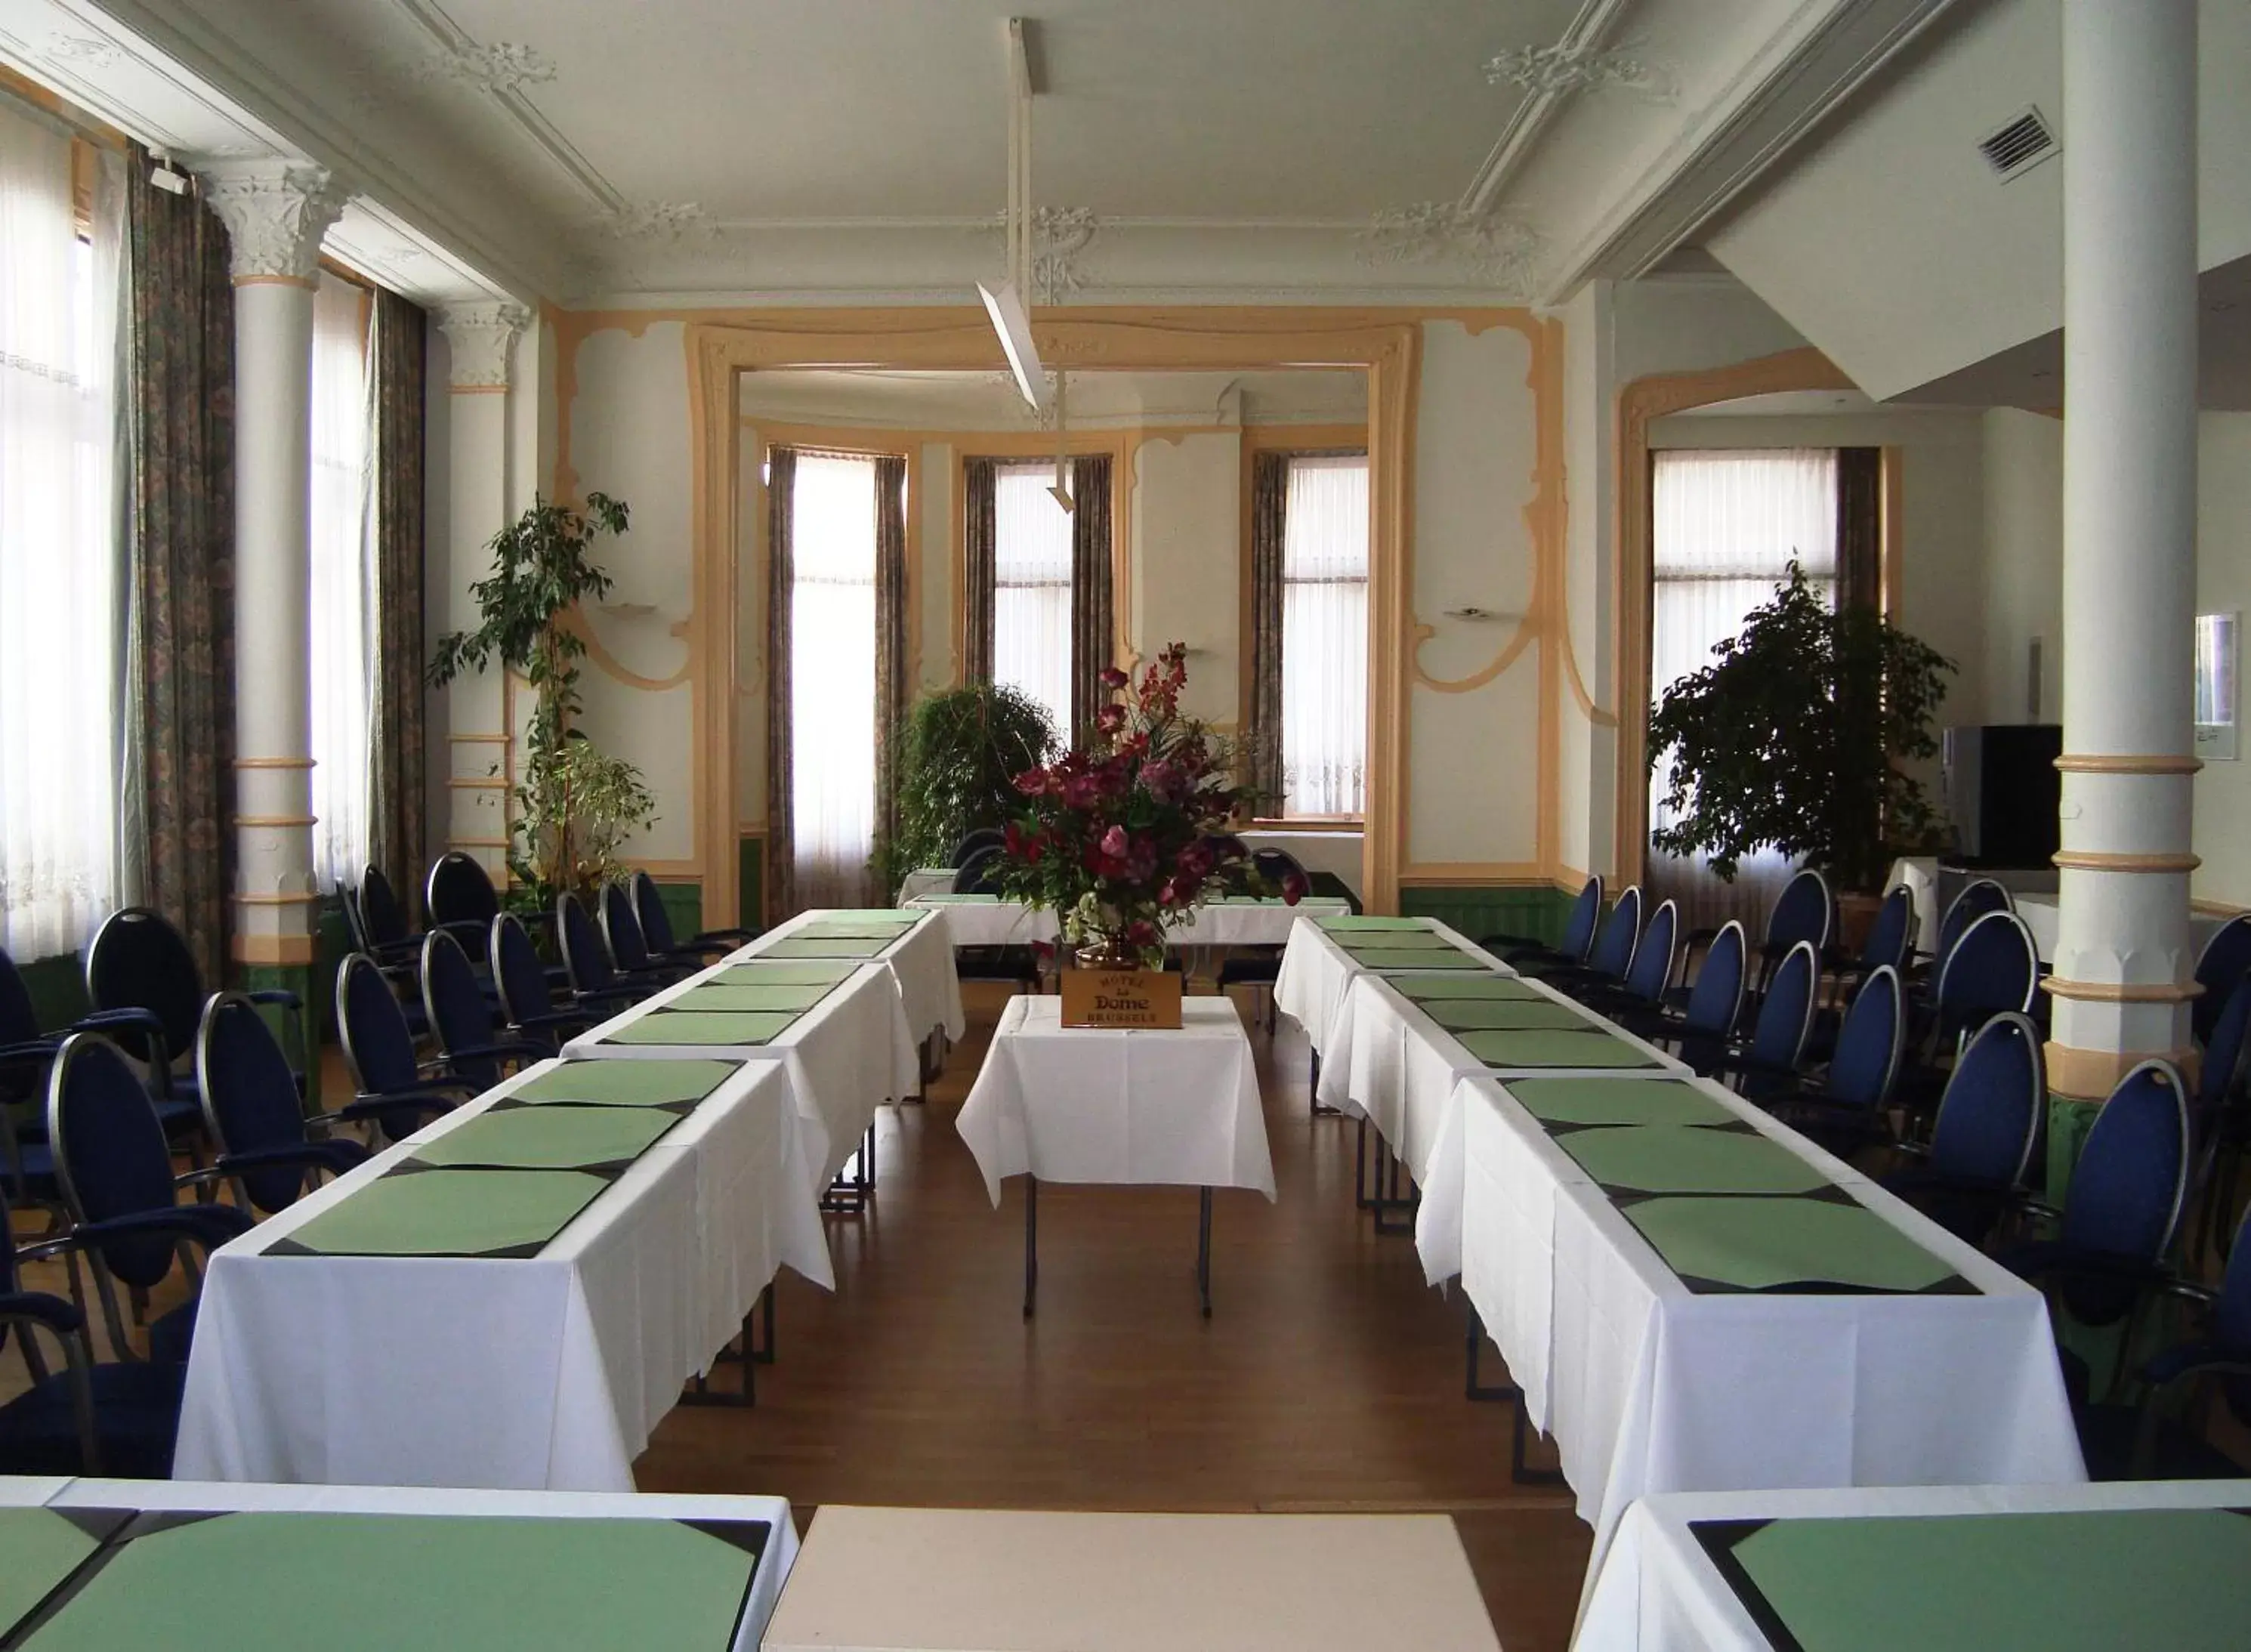 Business facilities in Hotel Le Dome